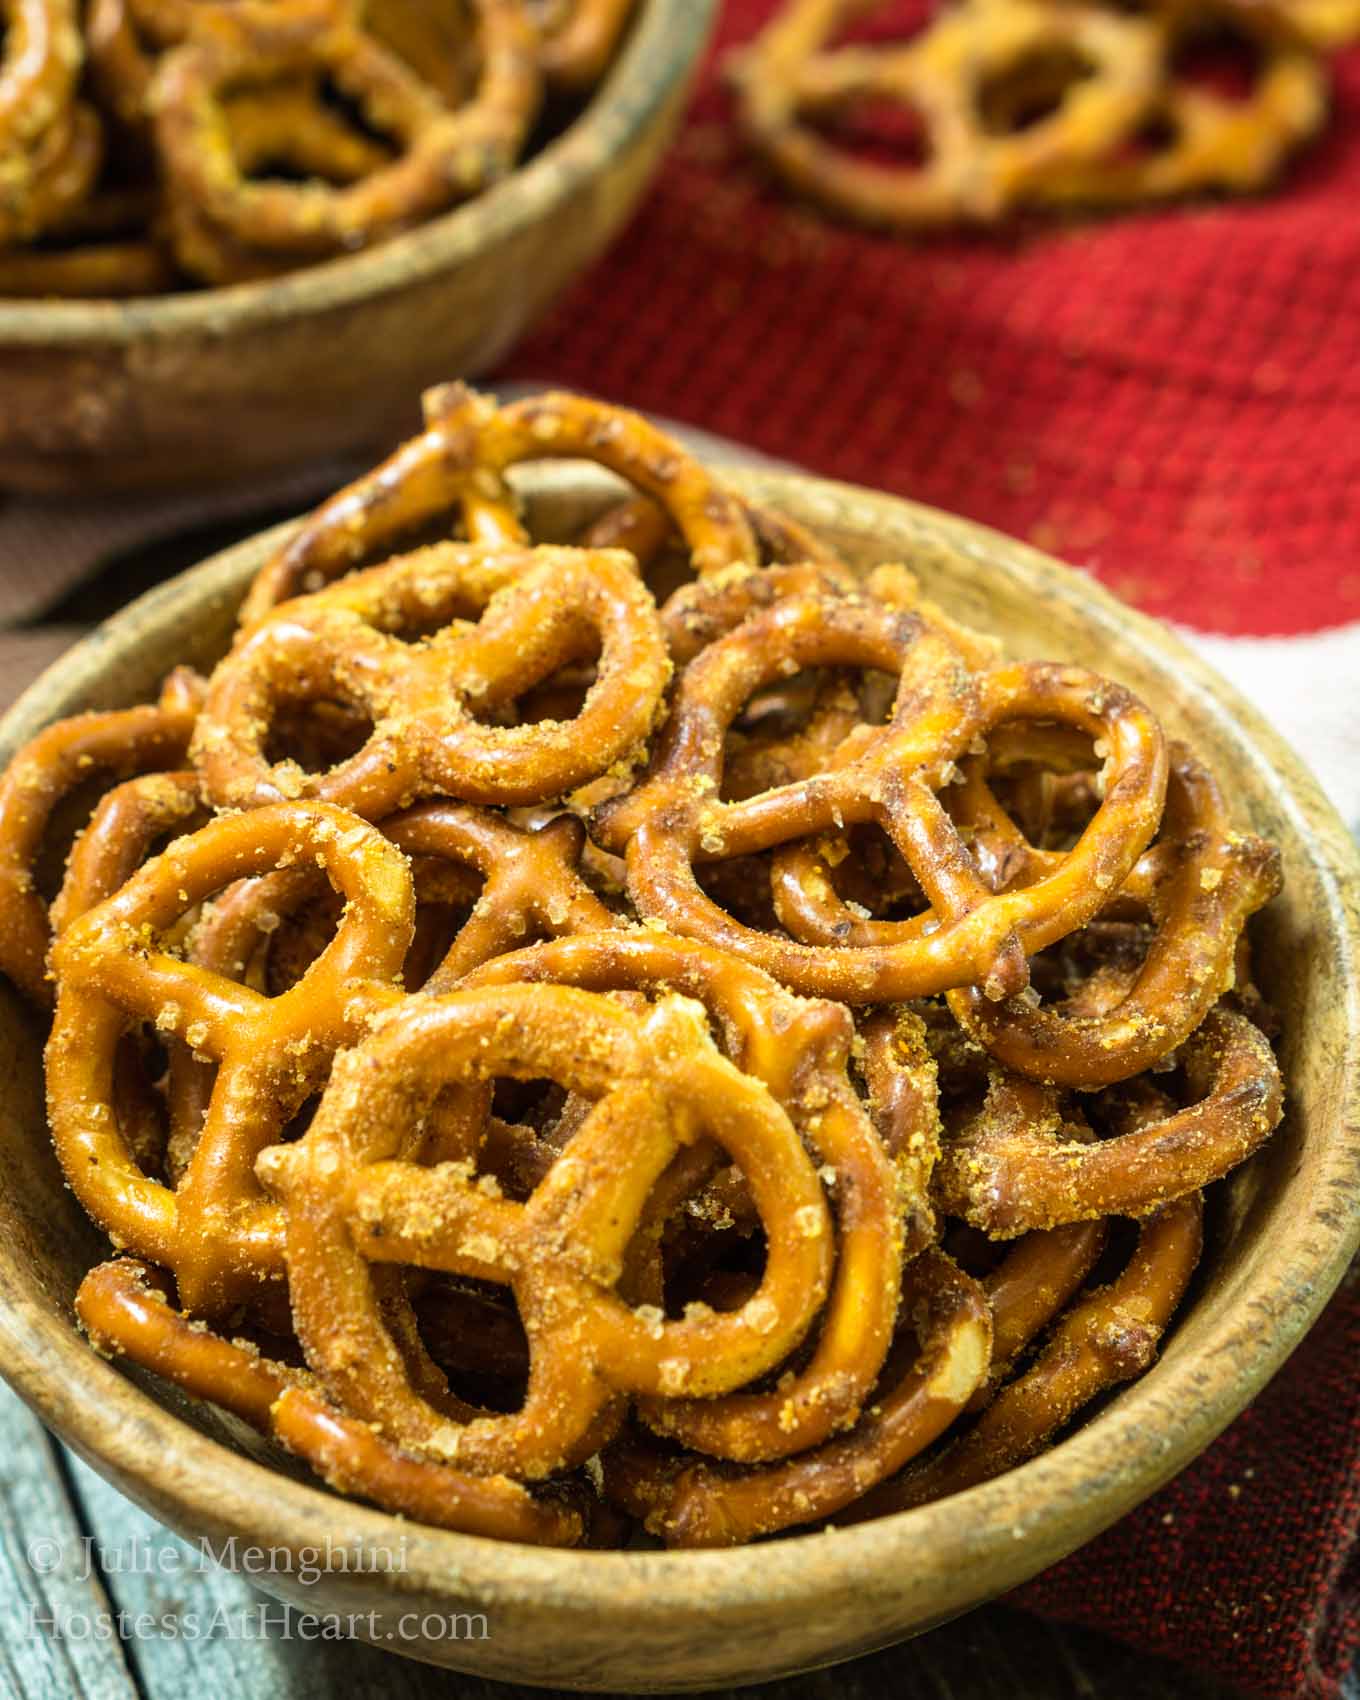 Angled view of a wooden bowl filled with pretzels that have been baked in a spicy Nacho Cheese seasoning. A second bowl of pretzels sits in the background over a wooden background.